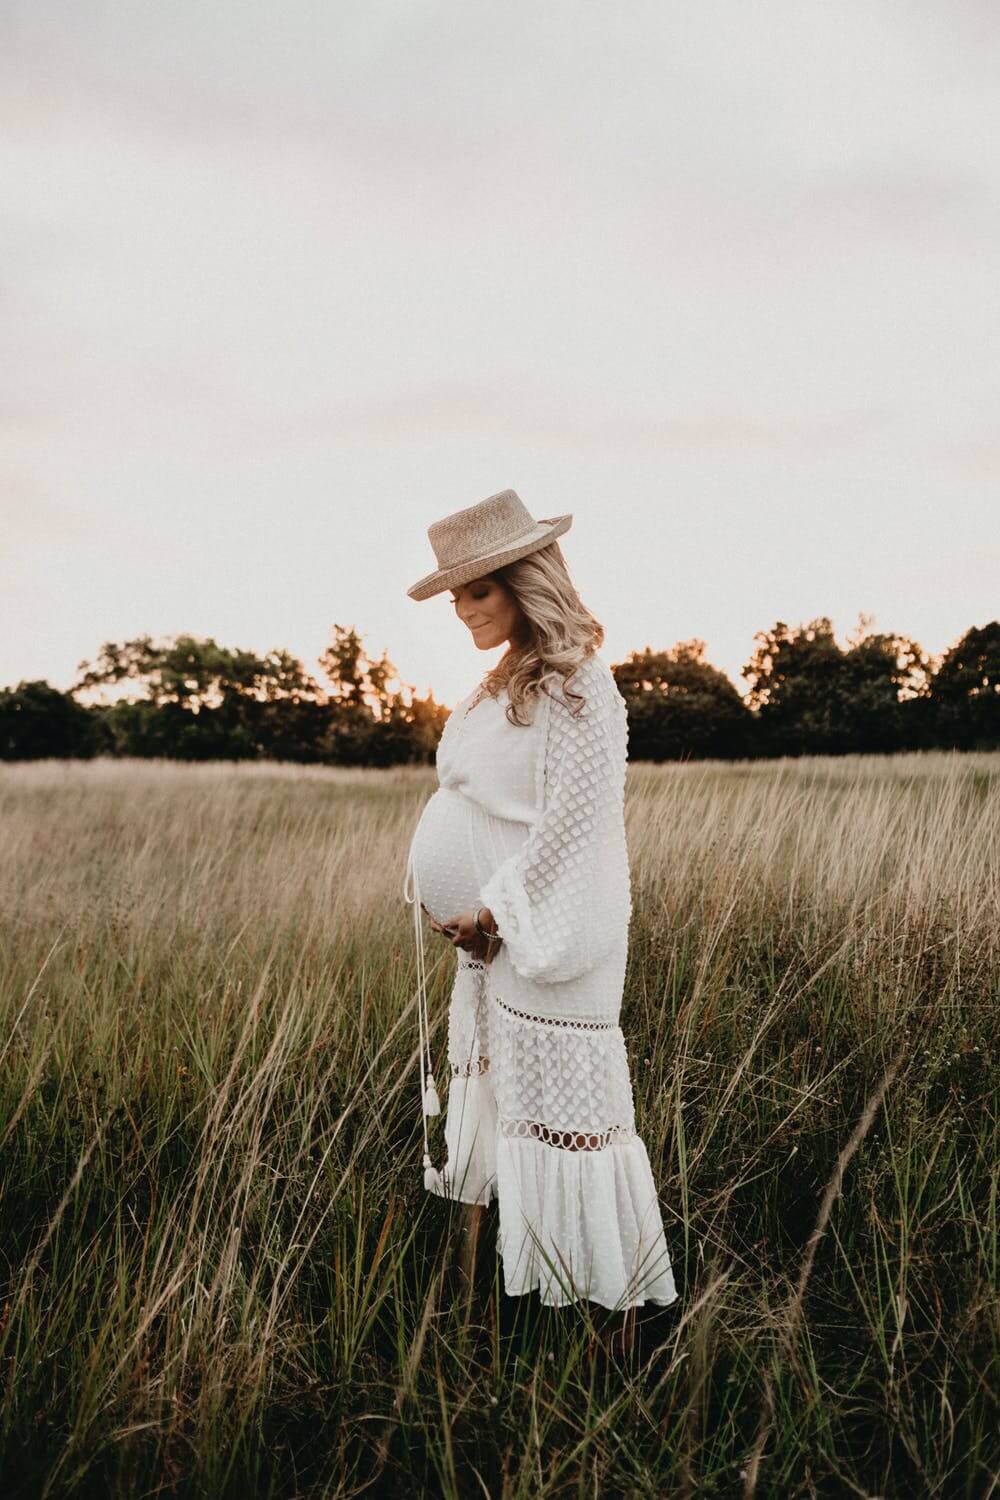 a person in a white dress in a field